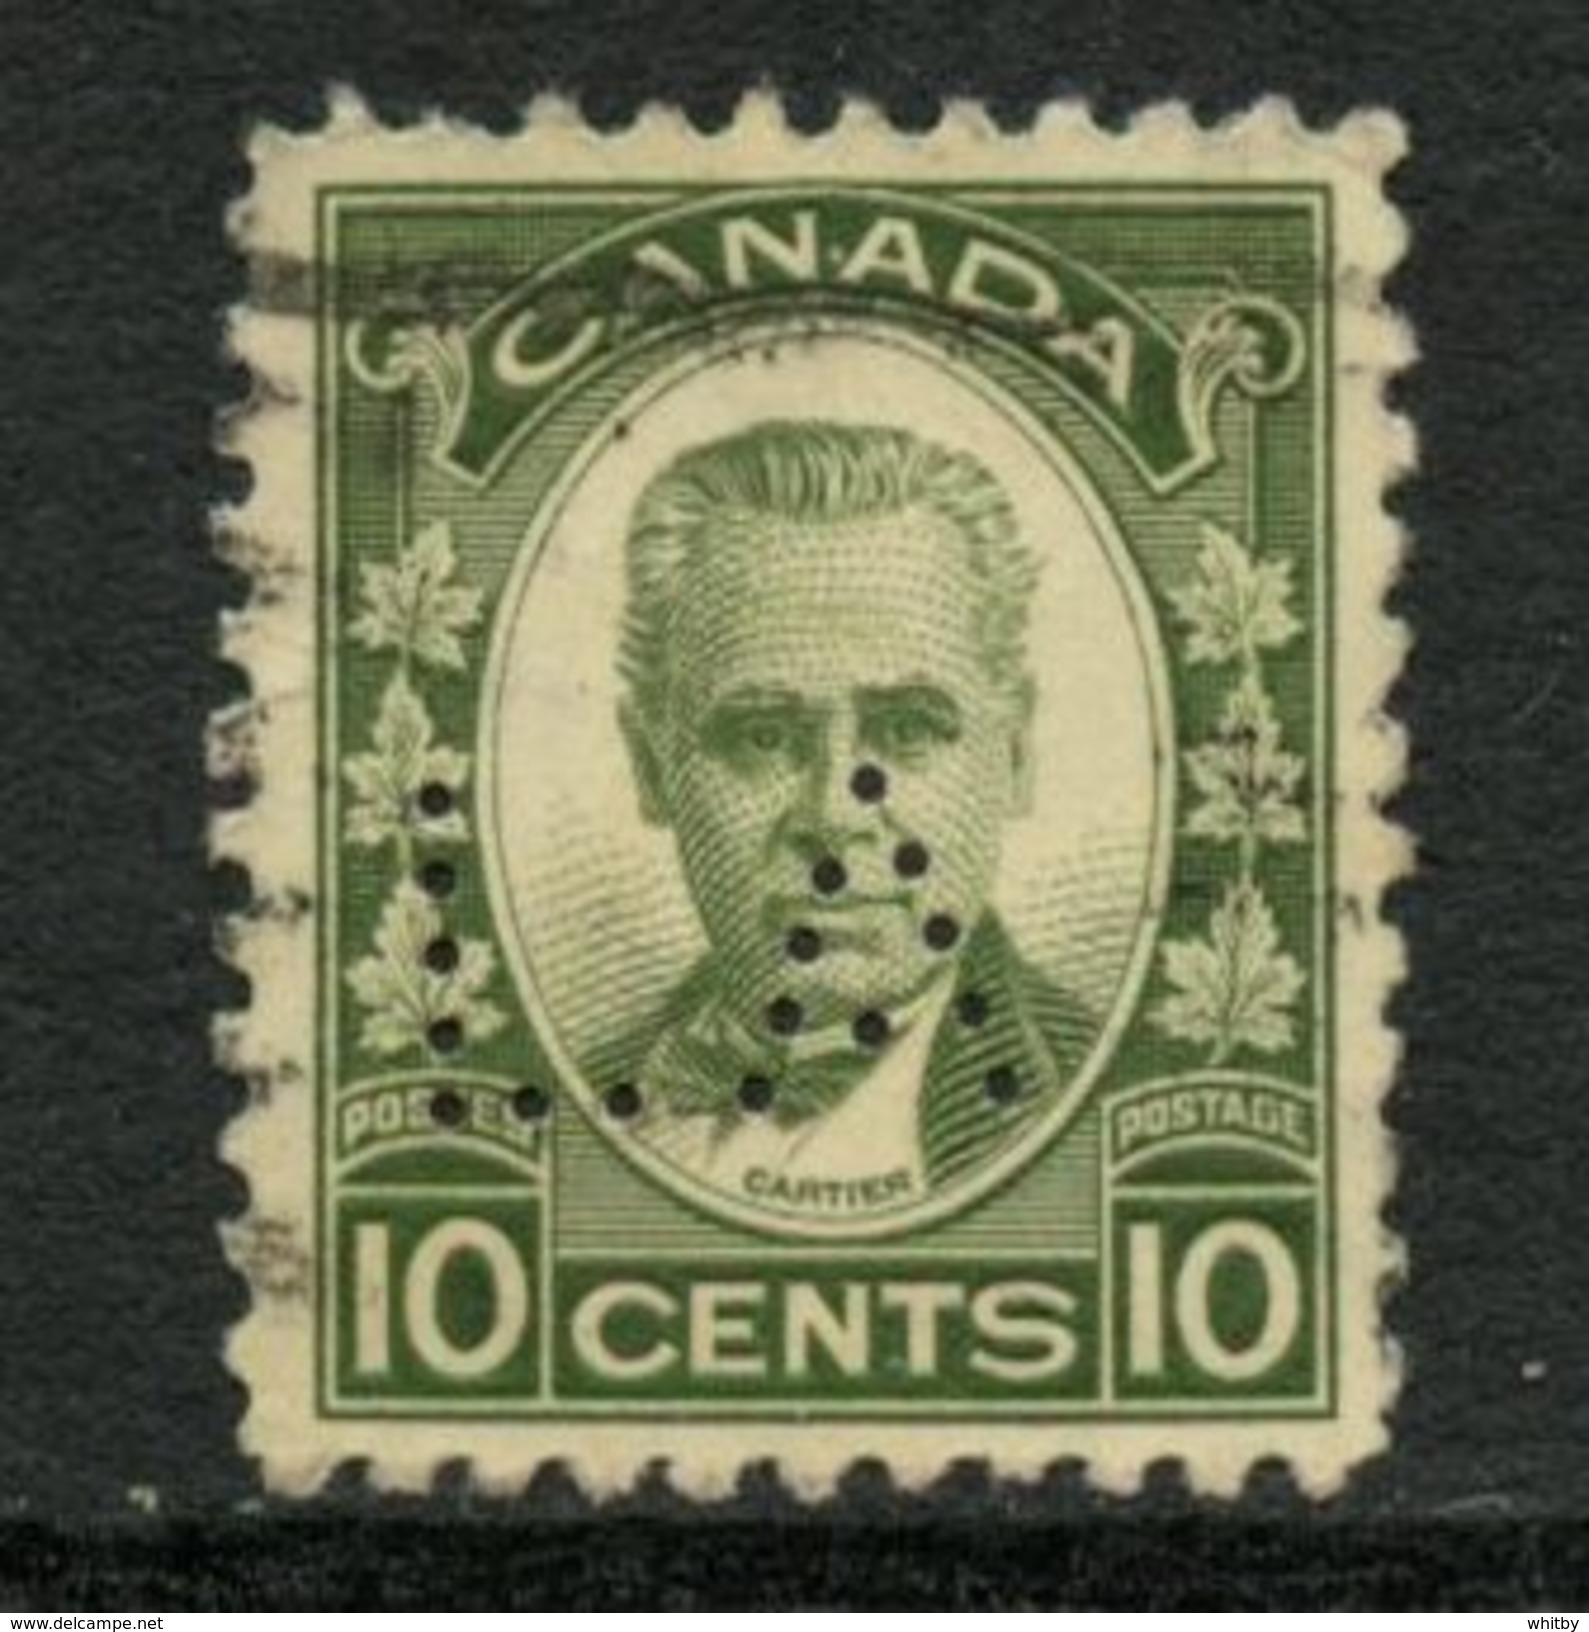 Canada 1931 10 Cent George Etienne Cartier Issue #190xx  Ontario Government Perfin - Perfins